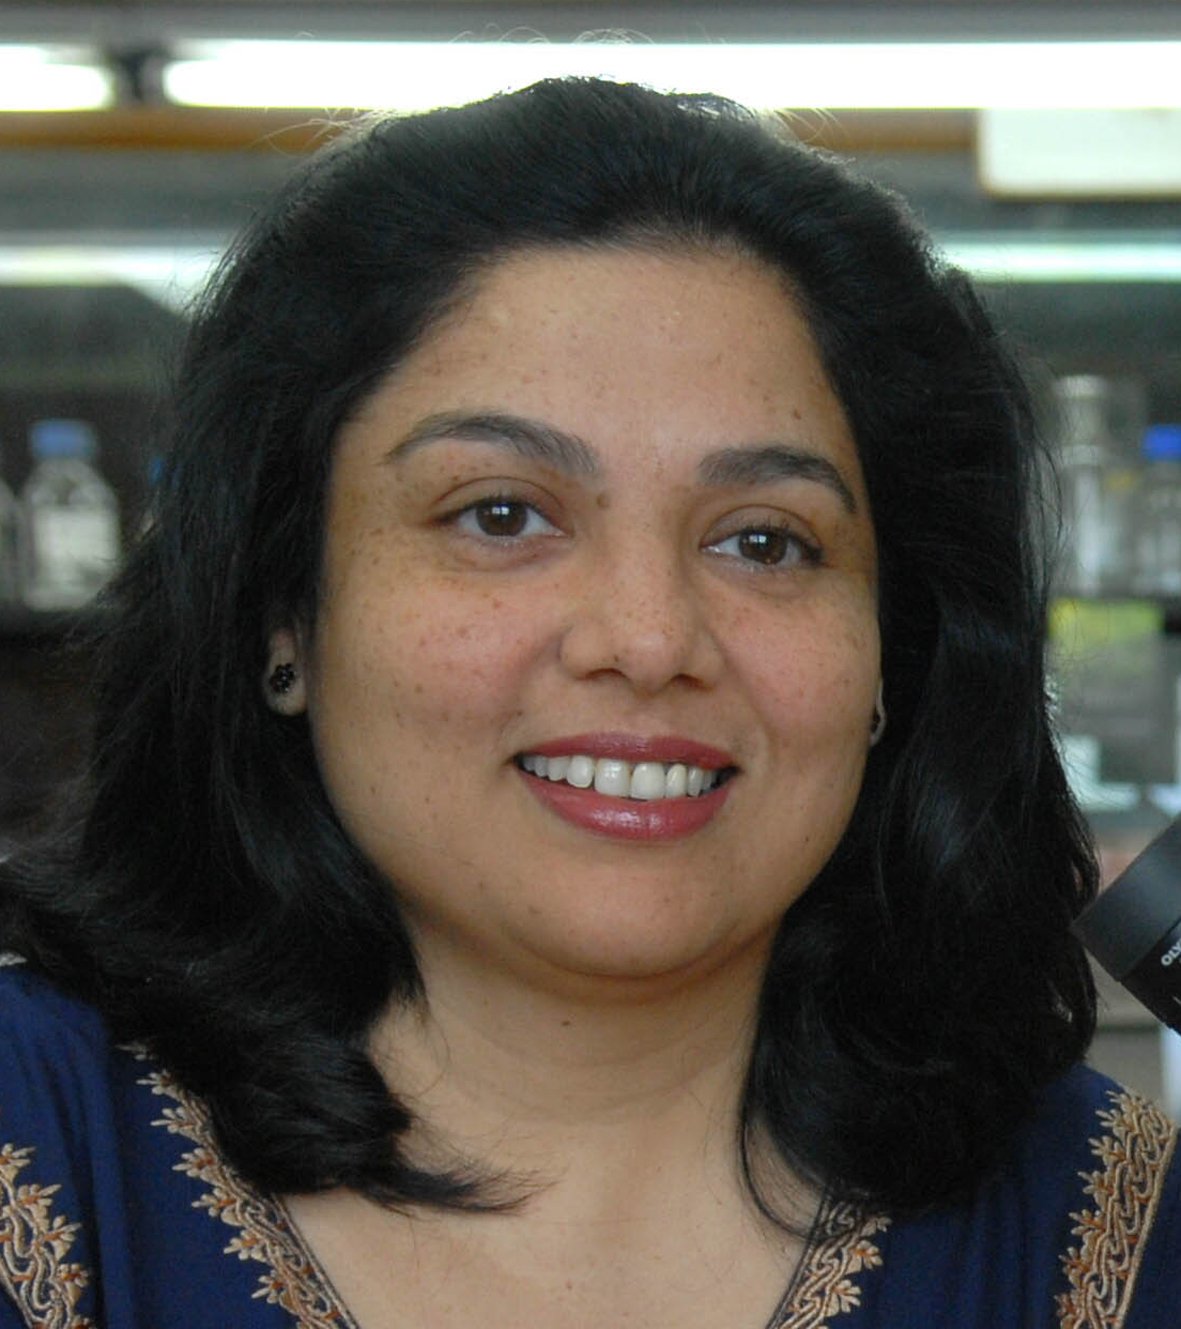 Prof Shubha Tole, neuroscientist, department of biological sciences, Tata Institute of Fundamental Research & winner of Infosys Prize 2014 in Life Sciences